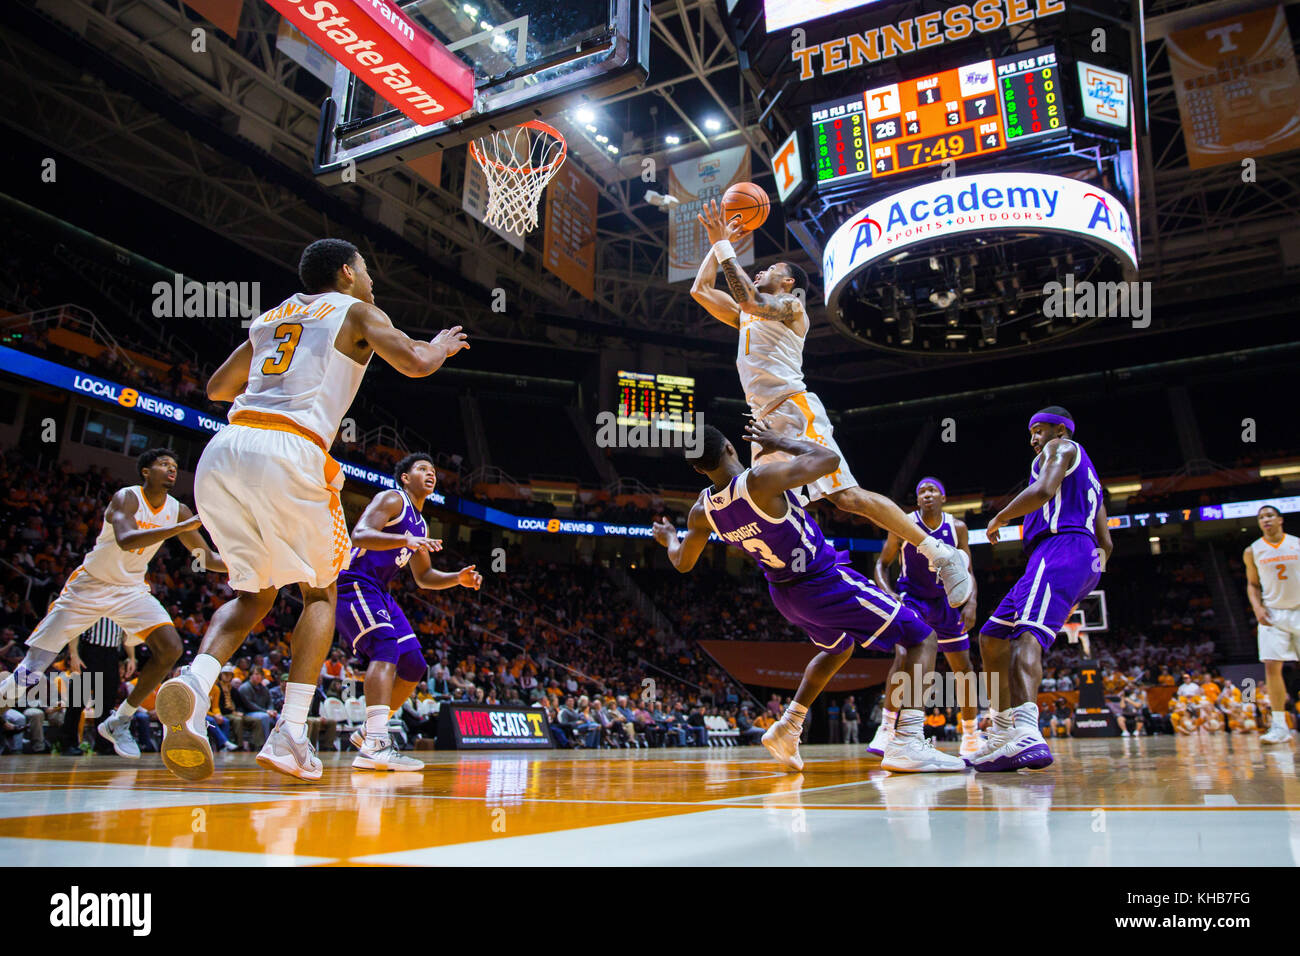 University of Tennessee, Tennessee November 14, 2017: Lamonte Turner #1 of the Tennessee Volunteers drives to the basket against Jamal Wright #3 of the High Point Panthers during the NCAA basketball game between the University of Tennessee Volunteers and the High Point University Panthers at Thompson Boling Arena in Knoxville TN Tim Gangloff/CSM Stock Photo